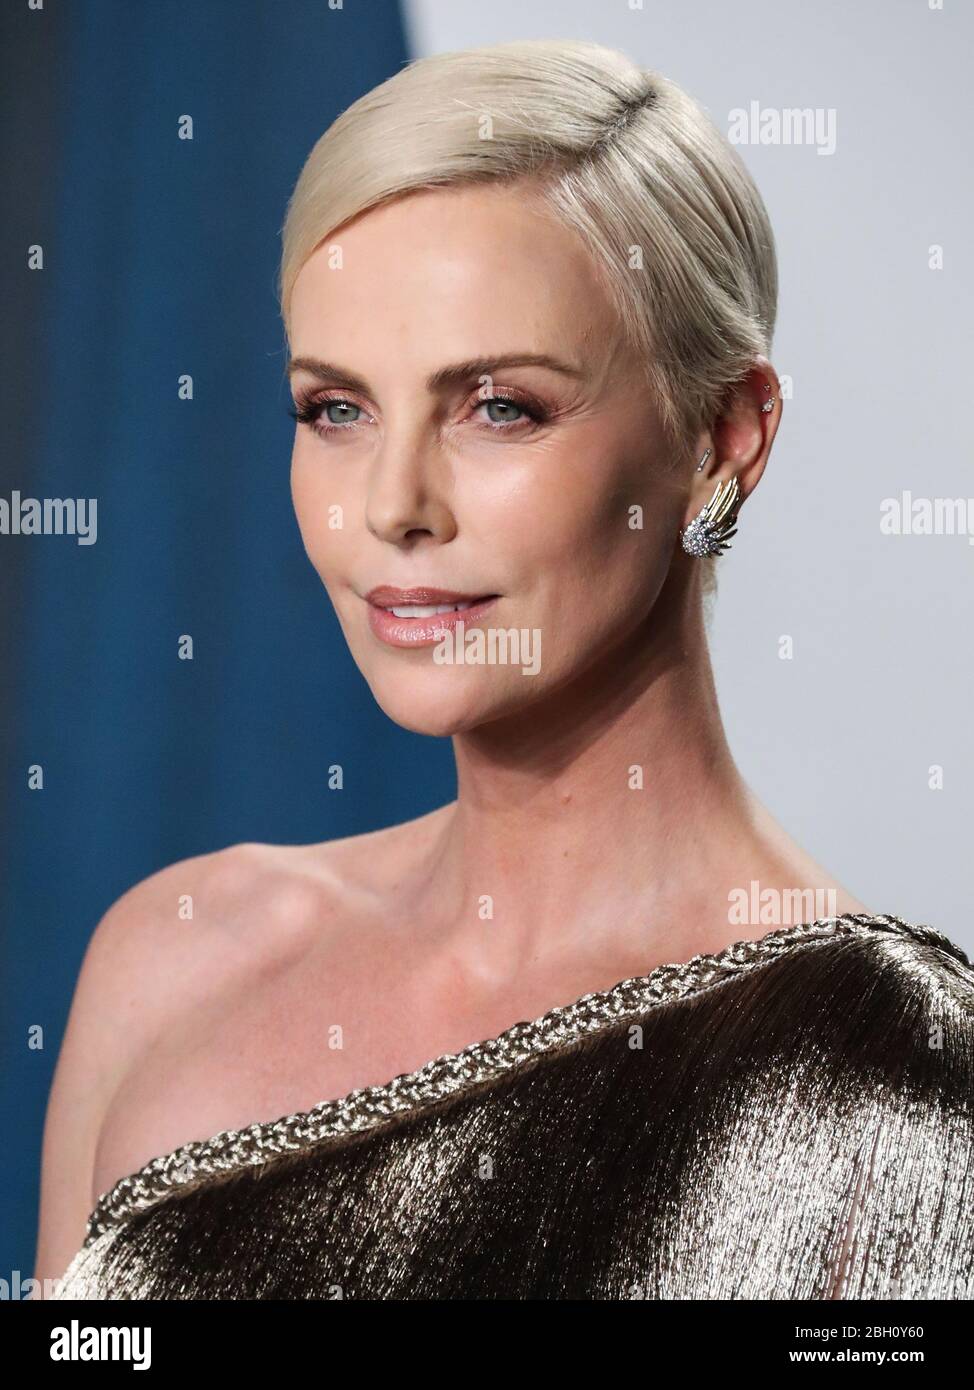 (FILE) Charlize Theron Announces $1 Million Dollar Donation Amid Coronavirus COVID-19 Pandemic. Charlize Theron has donated $1 million dollars to the coronavirus relief efforts through her foundation, The Charlize Theron Africa Outreach Project and partners CARE and the Entertainment Industry Foundation (EIF). BEVERLY HILLS, LOS ANGELES, CALIFORNIA, USA - FEBRUARY 09: Actress Charlize Theron wearing Dior Haute Couture with Jimmy Choo shoes and clutch arrives at the 2020 Vanity Fair Oscar Party held at the Wallis Annenberg Center for the Performing Arts on February 9, 2020 in Beverly Hills, Los Stock Photo